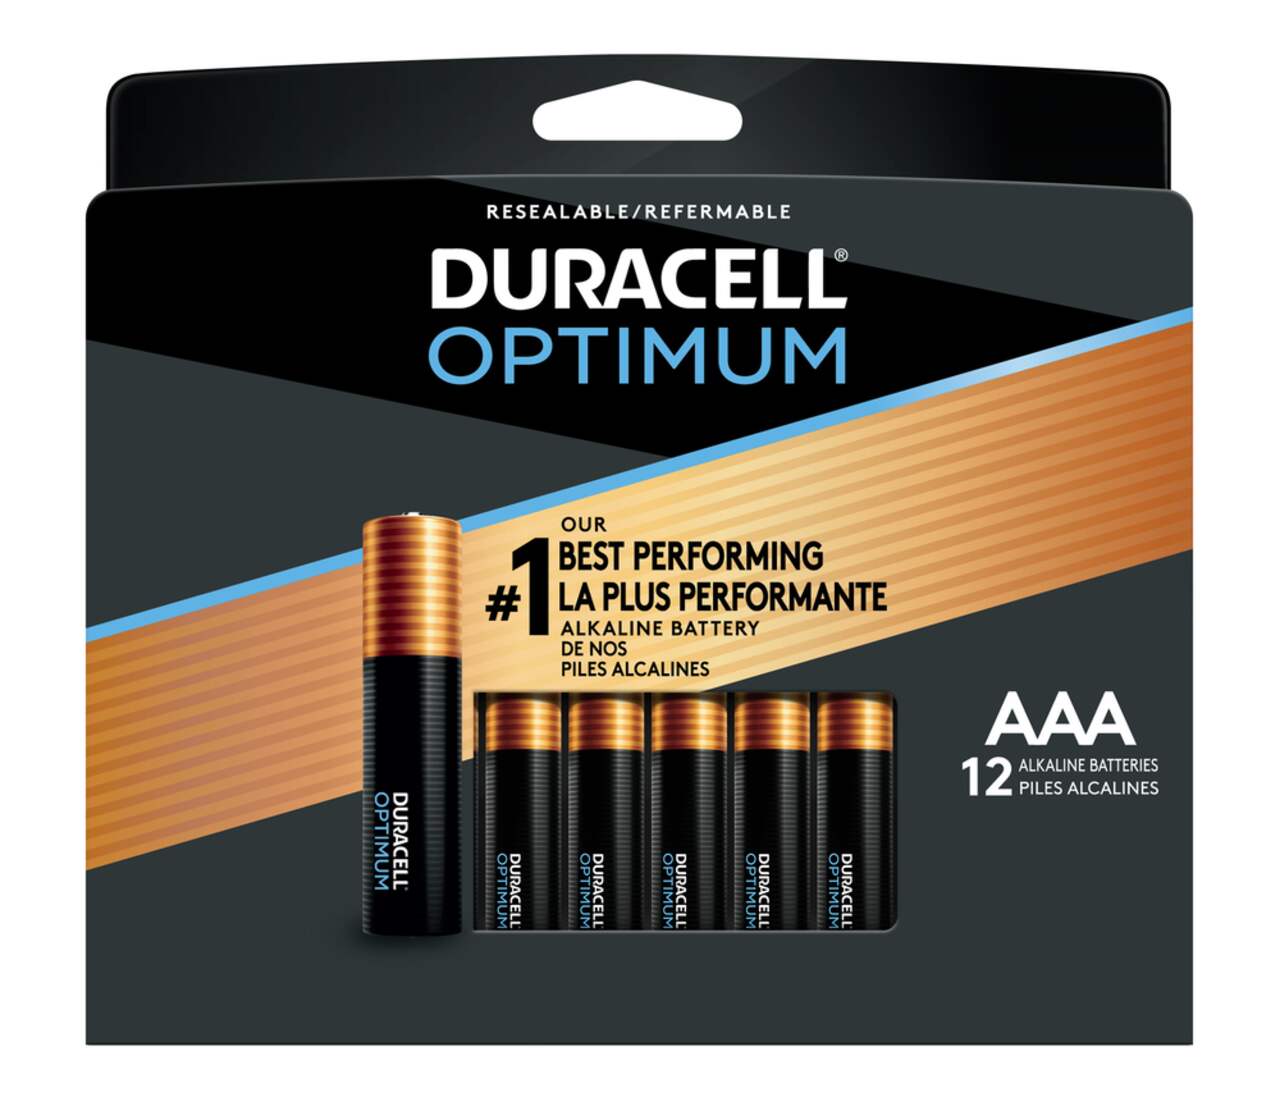  Duracell Optimum AAA Batteries with Power Boost Ingredients, 12  Count Pack with Long-lasting Power, All-Purpose Alkaline AAA Battery for  Household and Office Devices : Health & Household